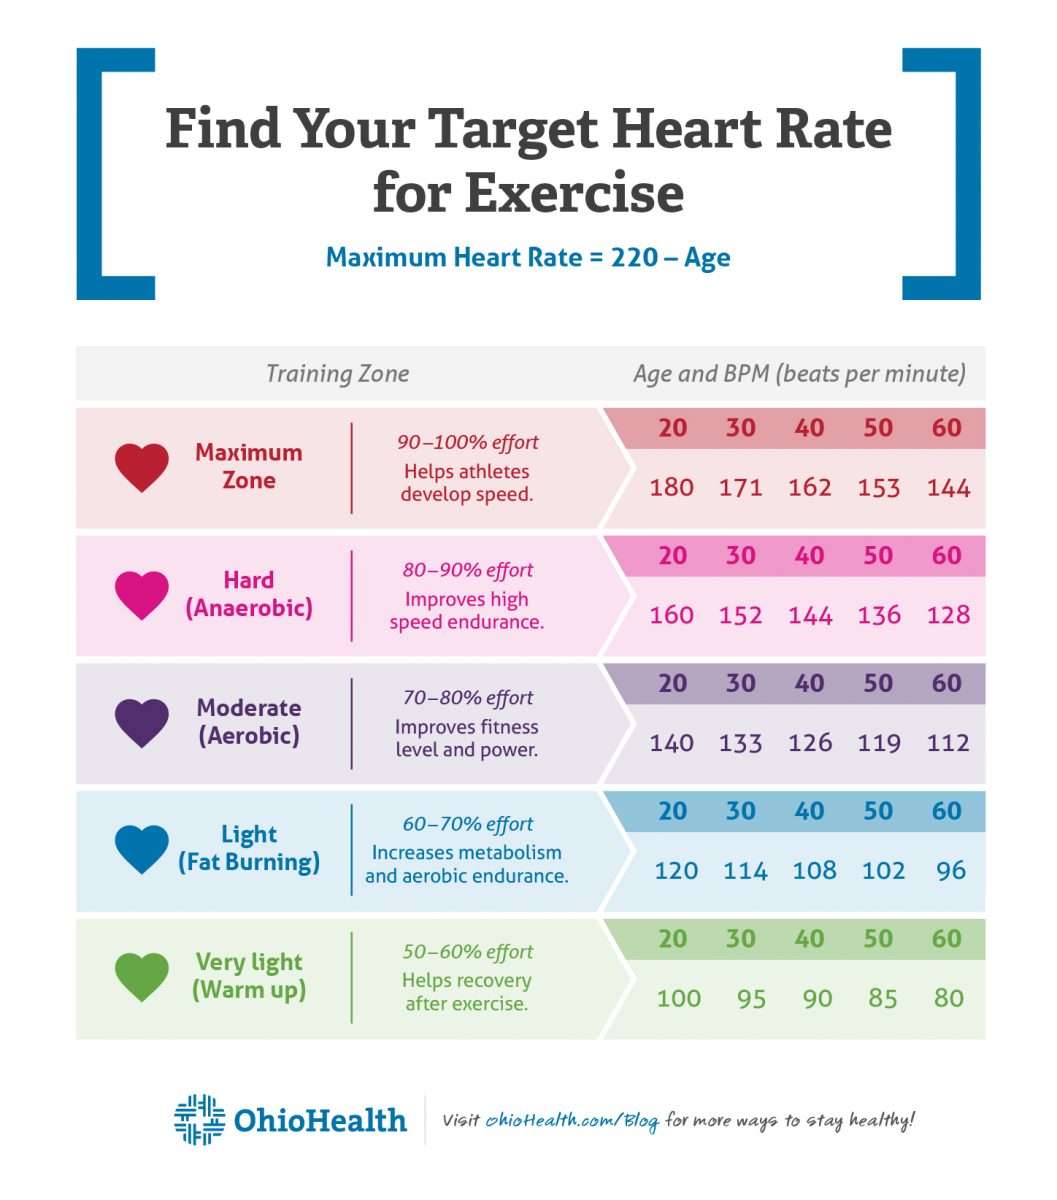 How To: Easily Find Your Target Heart Rate for Exercise